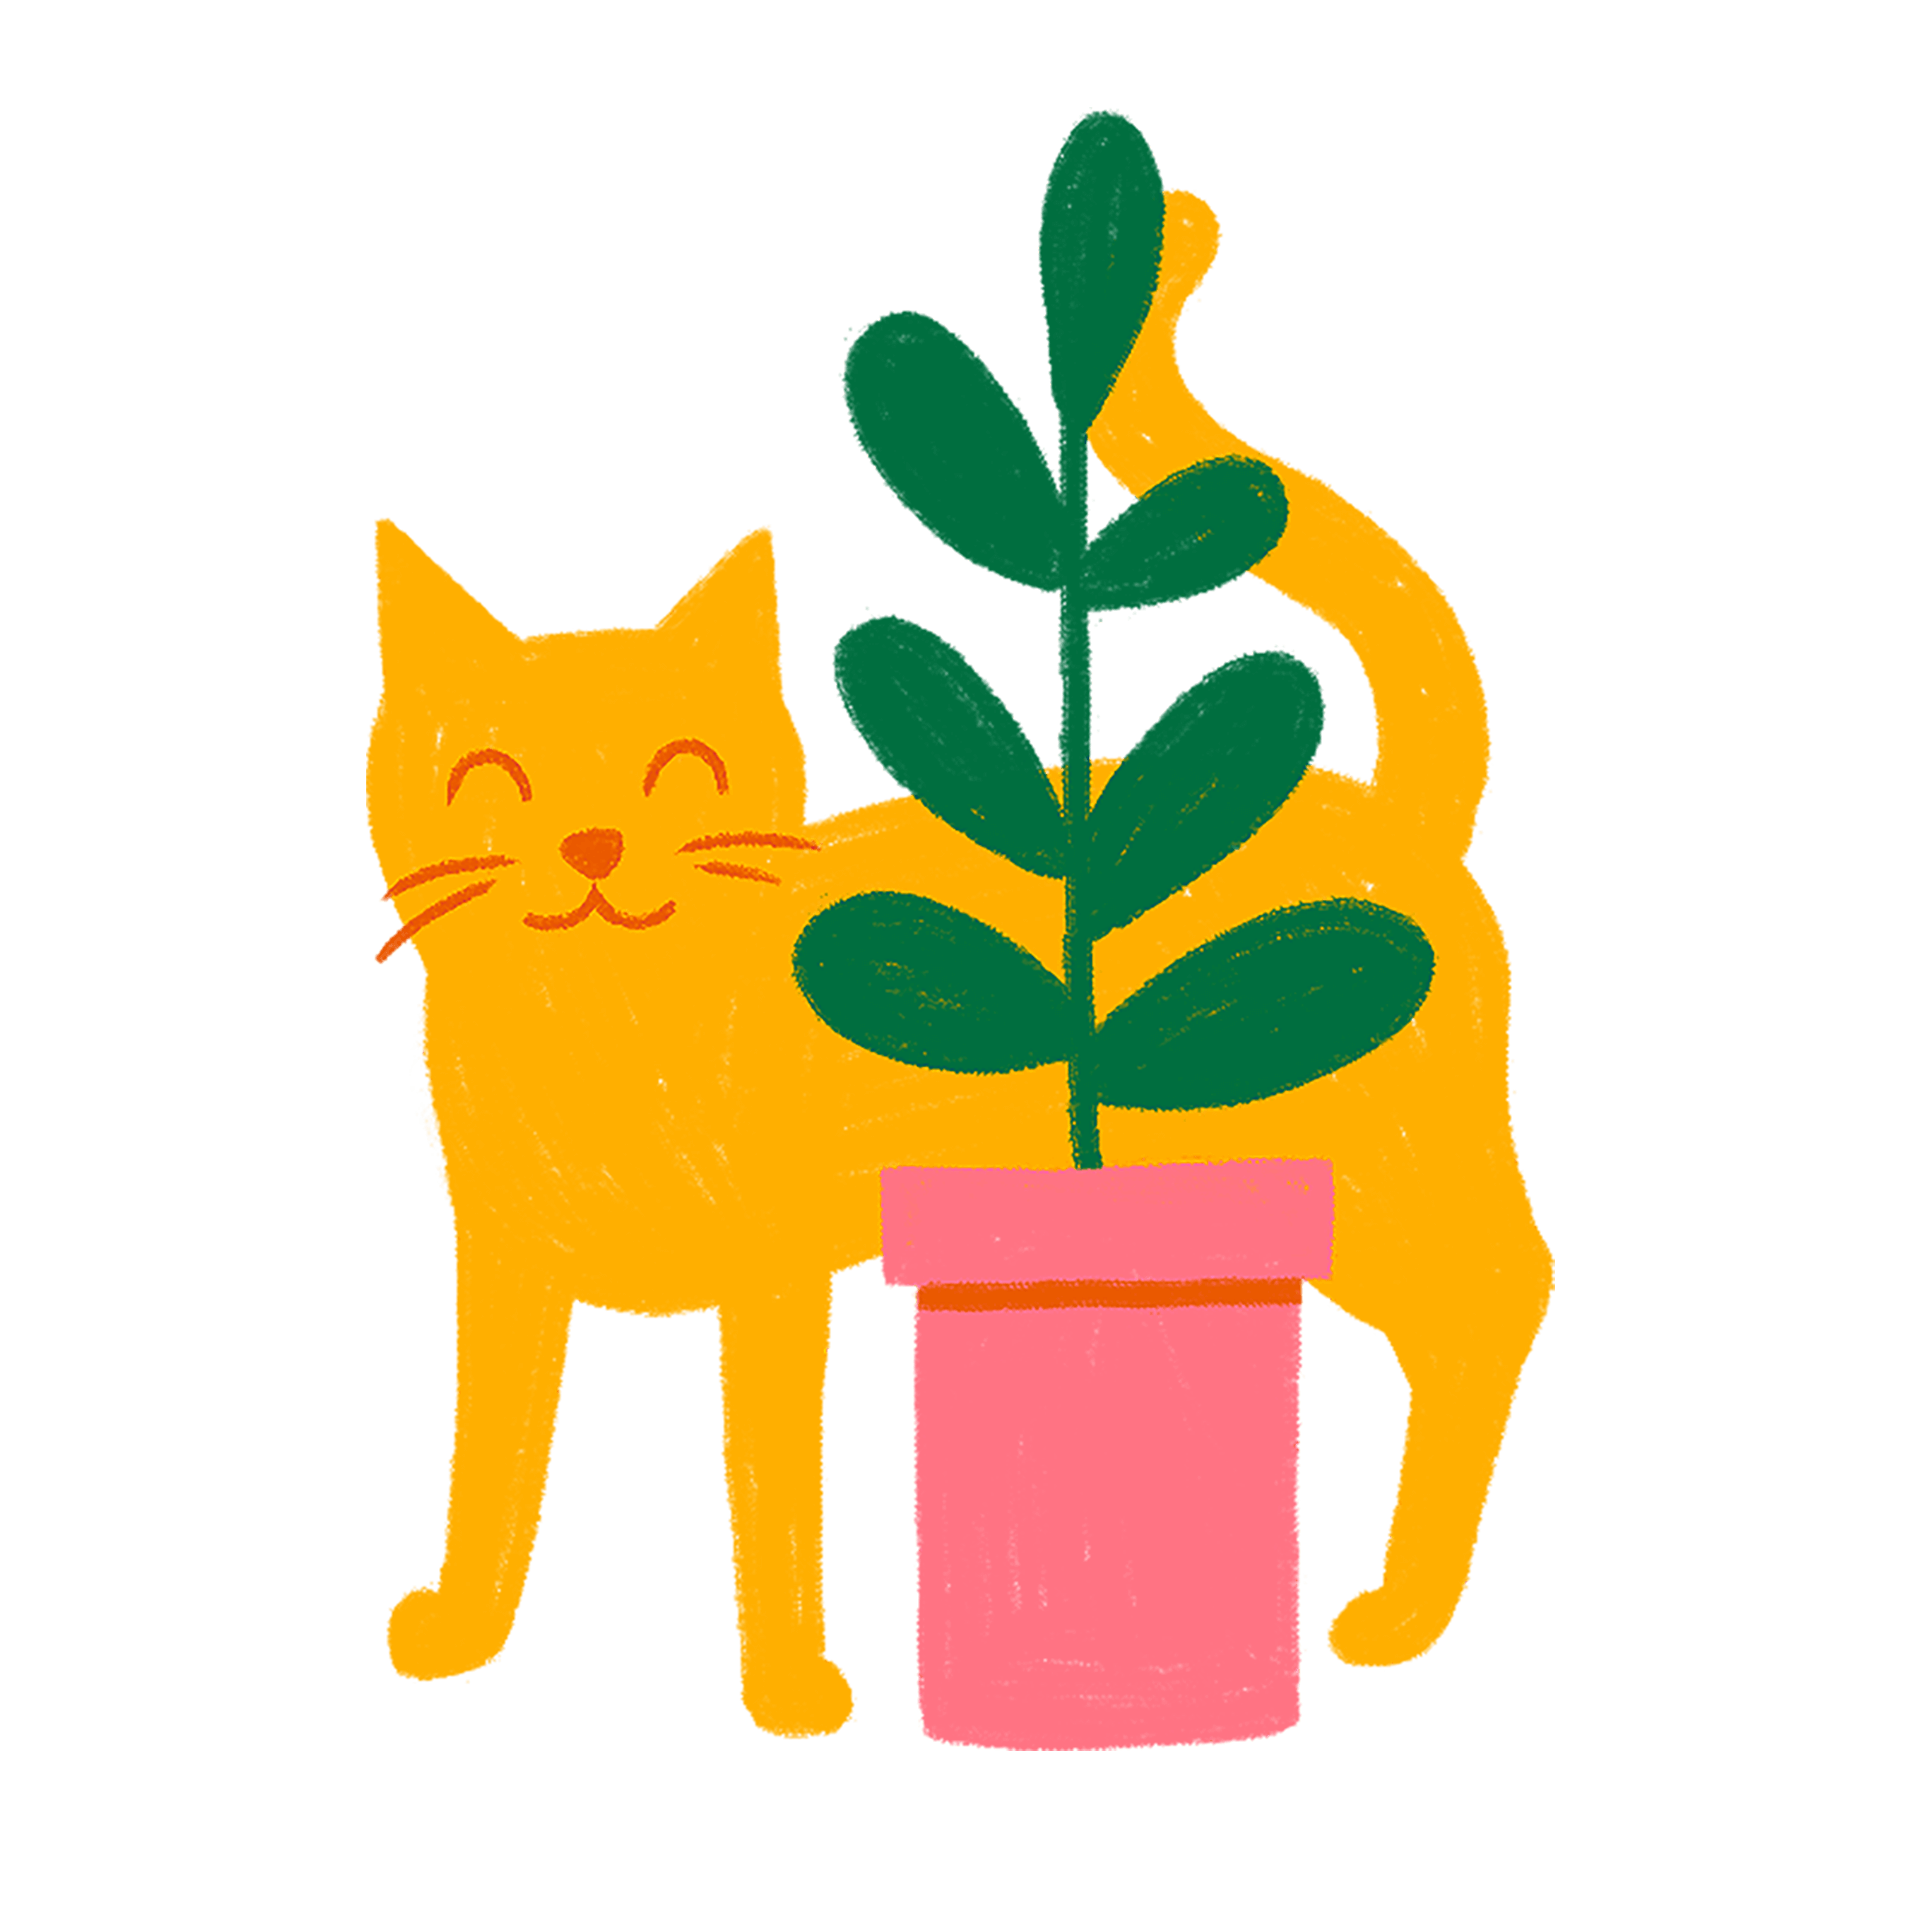 An illustration of a yellow cat smiling behind a plant in a pink pot